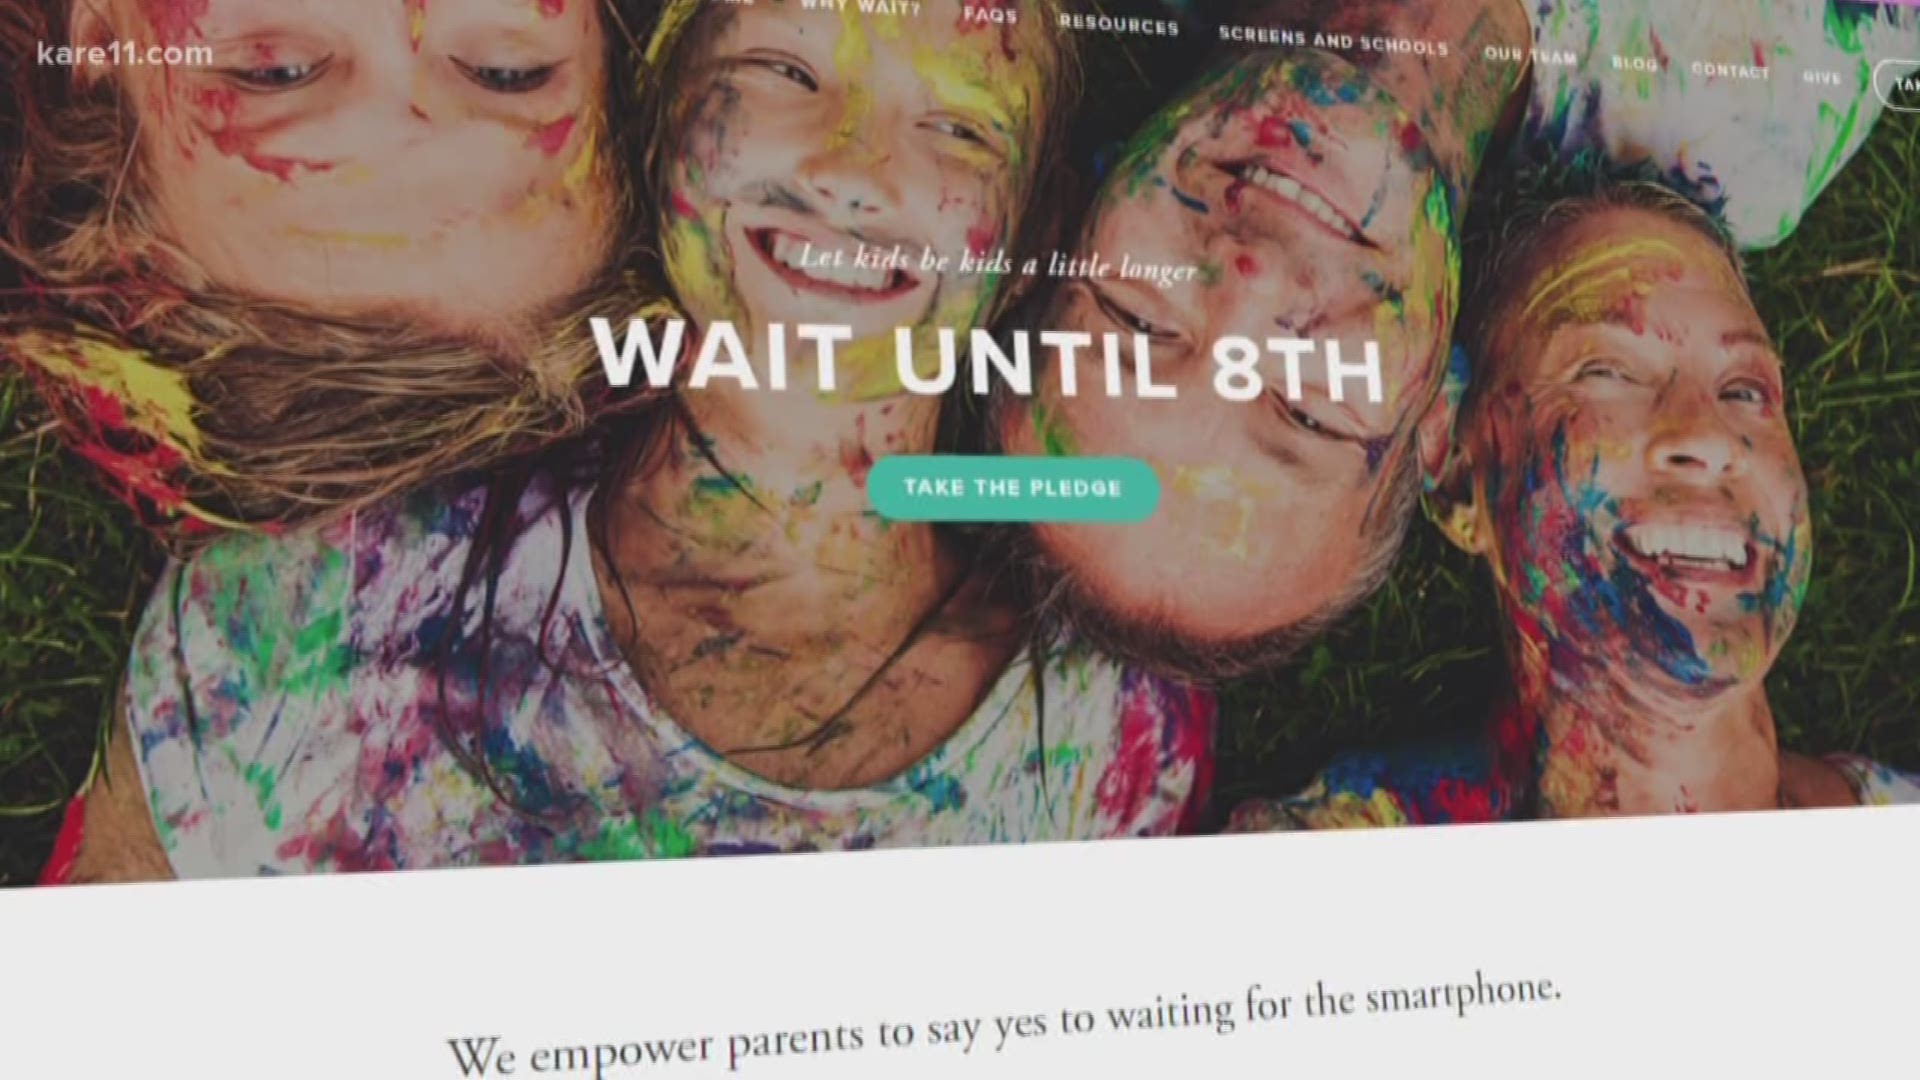 Wait Until 8th asks parents to pledge to wait until their children are in the 8th grade to determine whether a smartphone is necessary for their child.